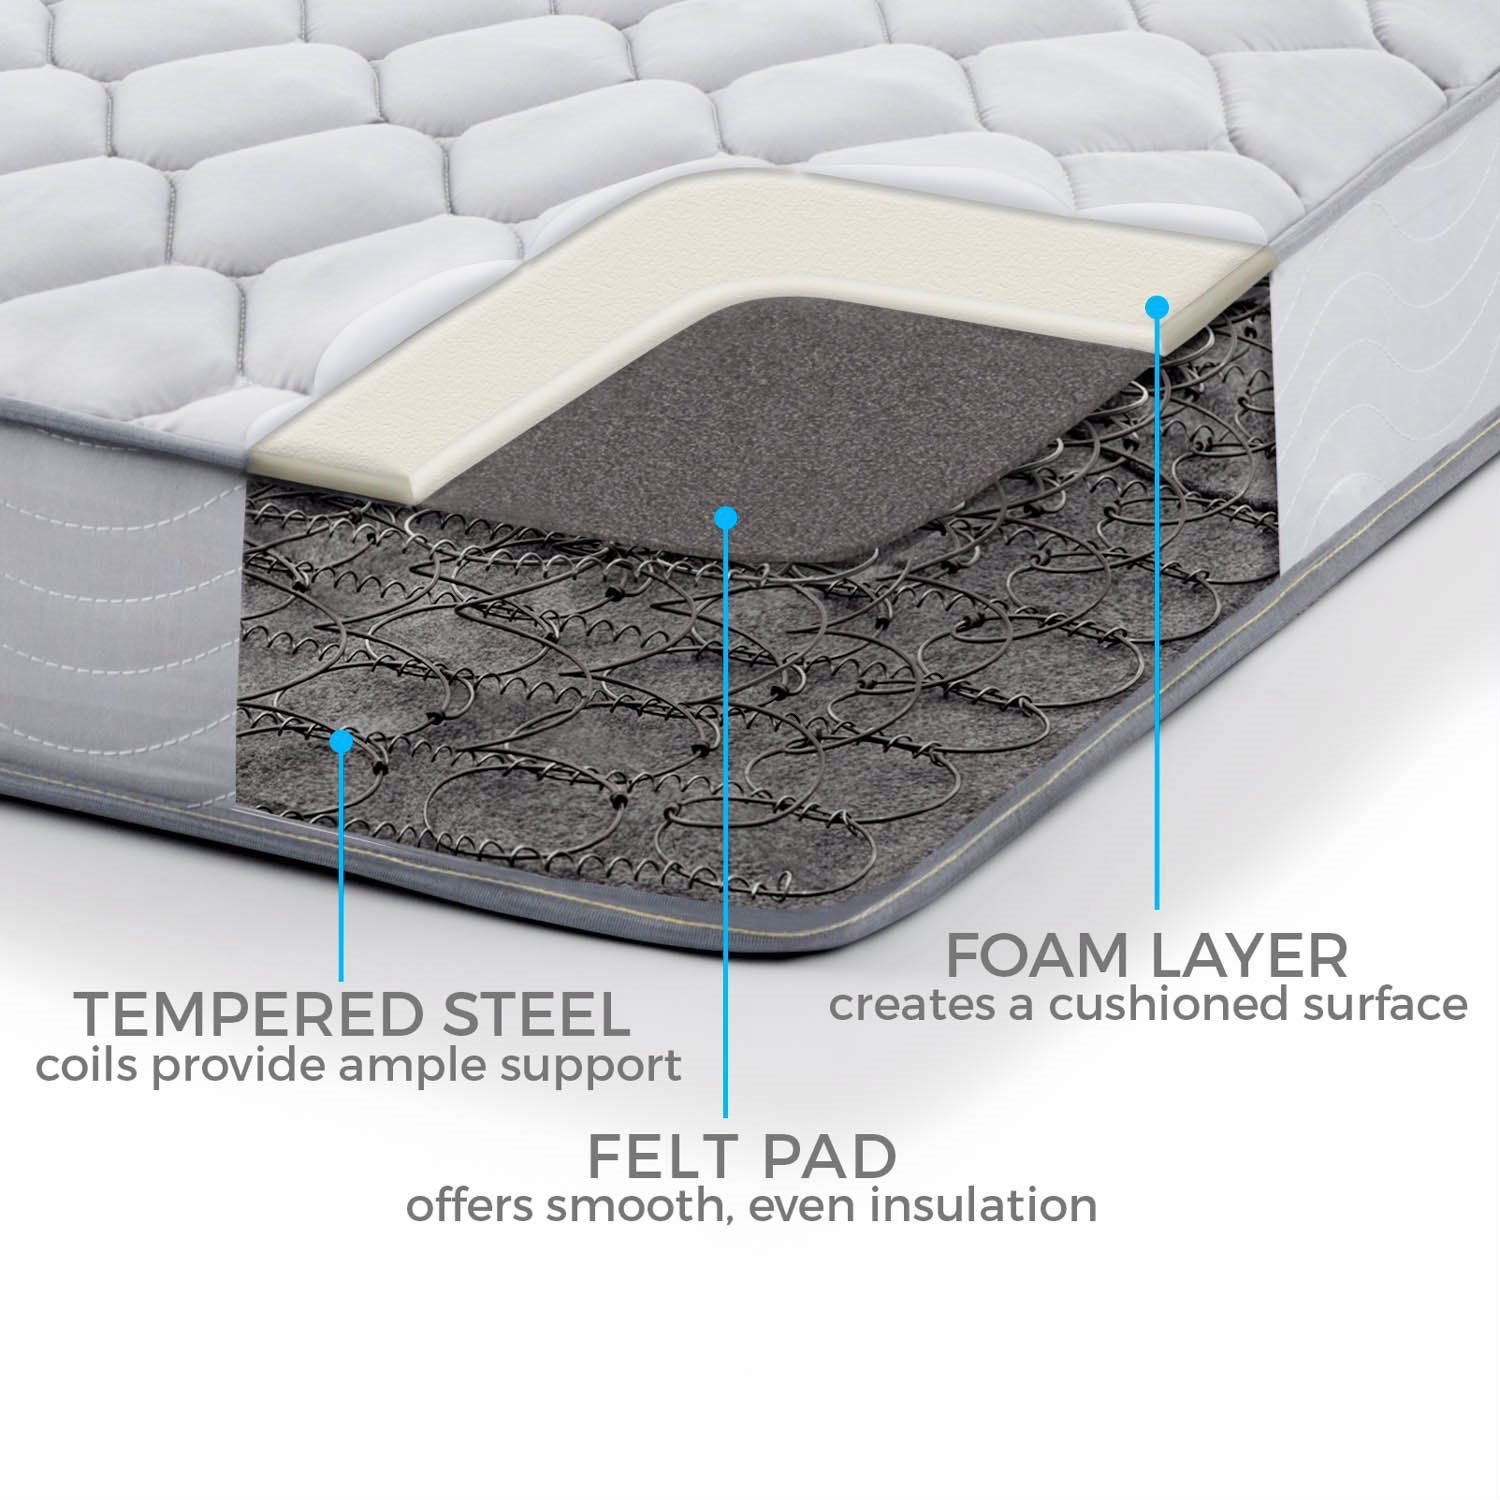 6 Inch Innerspring Mattress Quilted Fabric Cover Foam Layer Rolled Compressed 